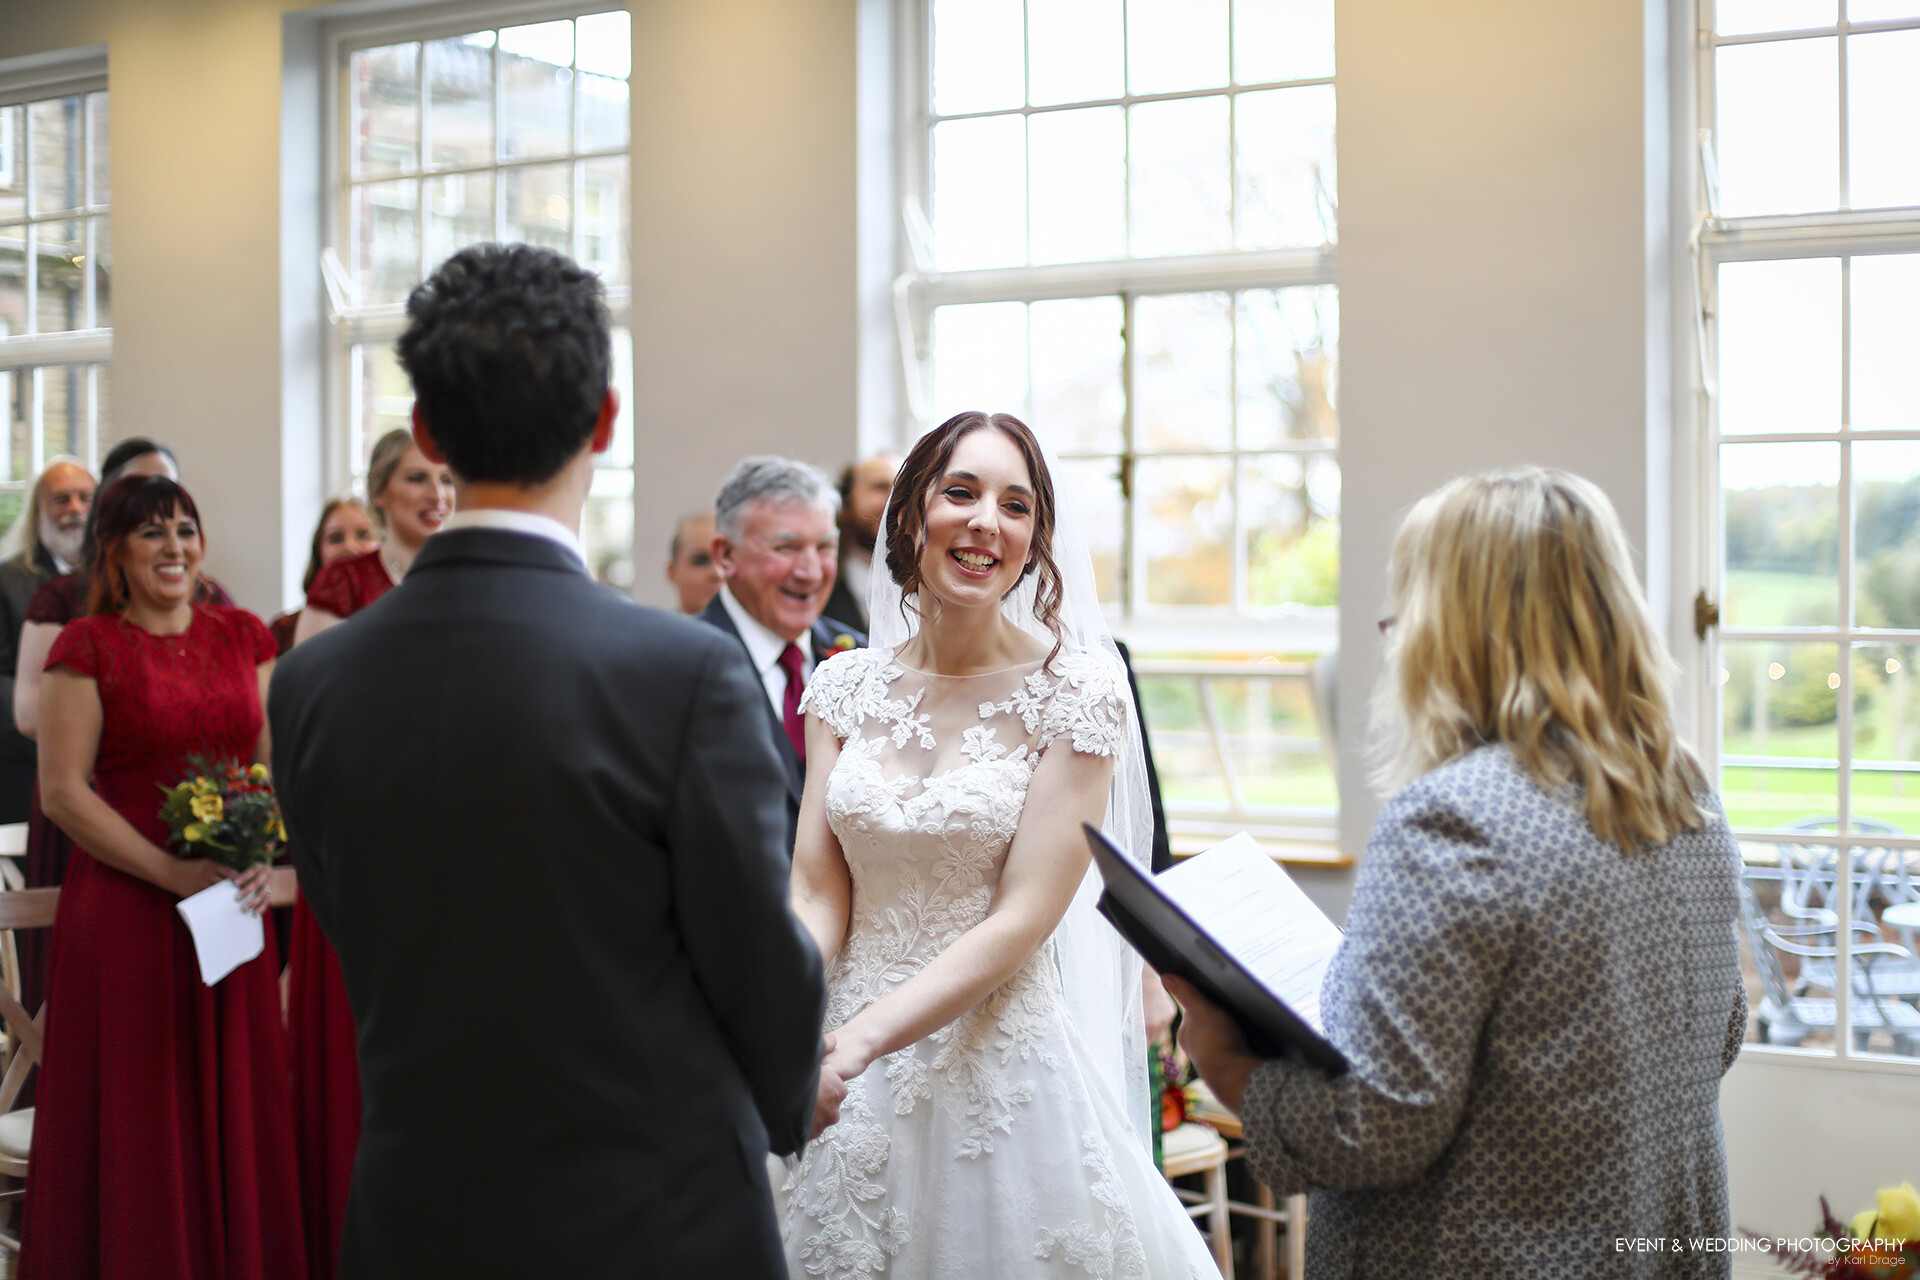 The Bride laughs during her wedding ceremony